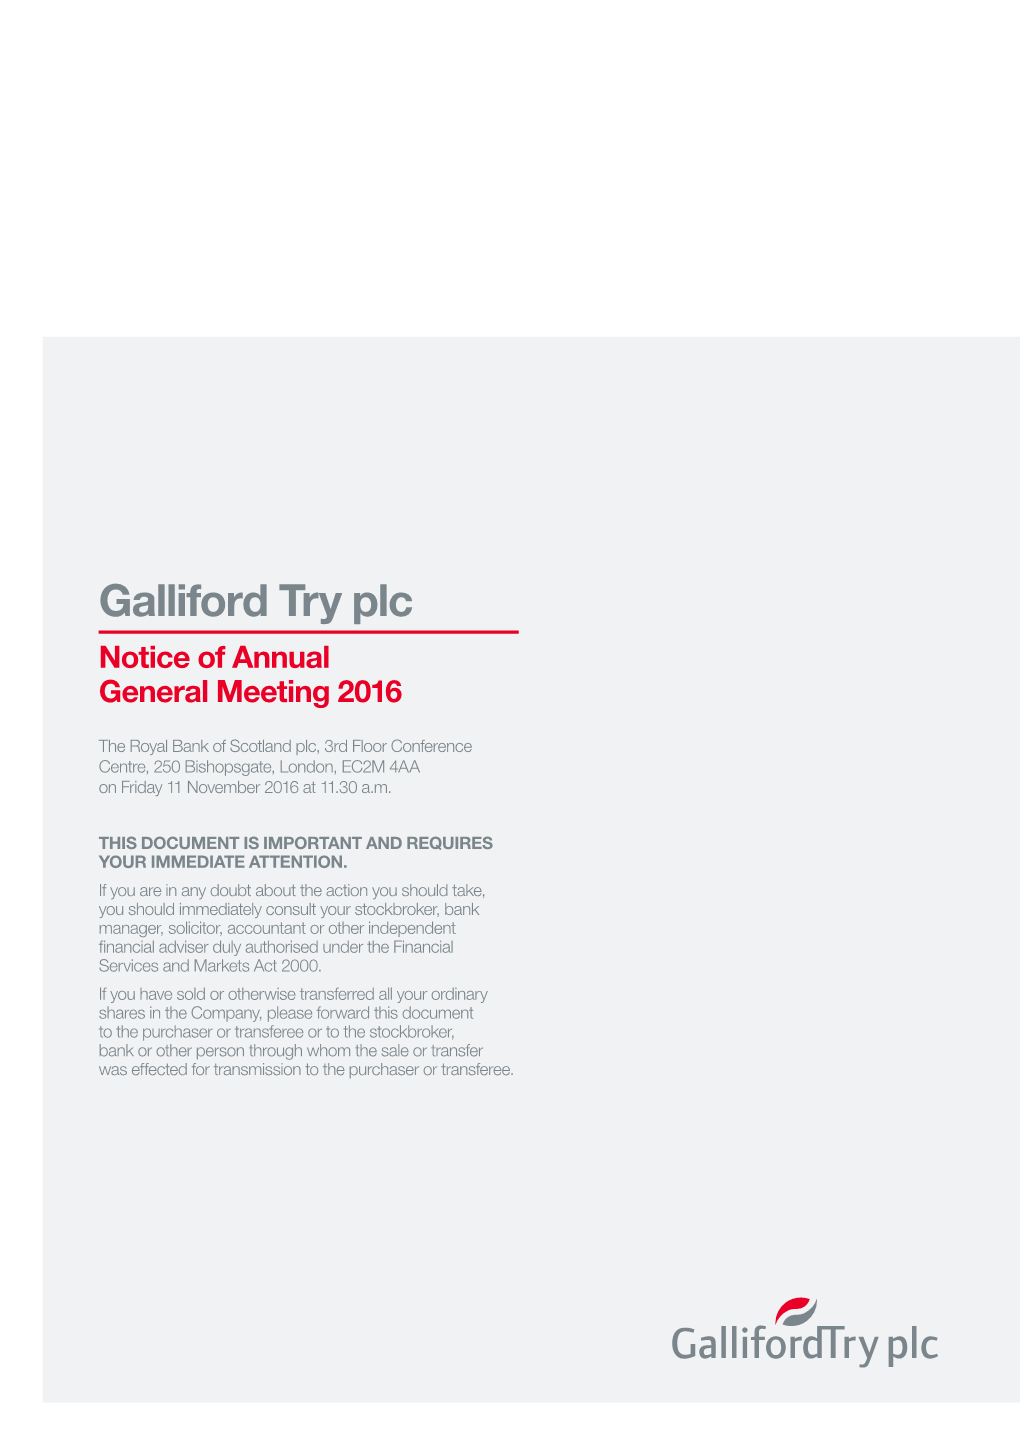 04 Oct 2016 Notice of Annual General Meeting Download